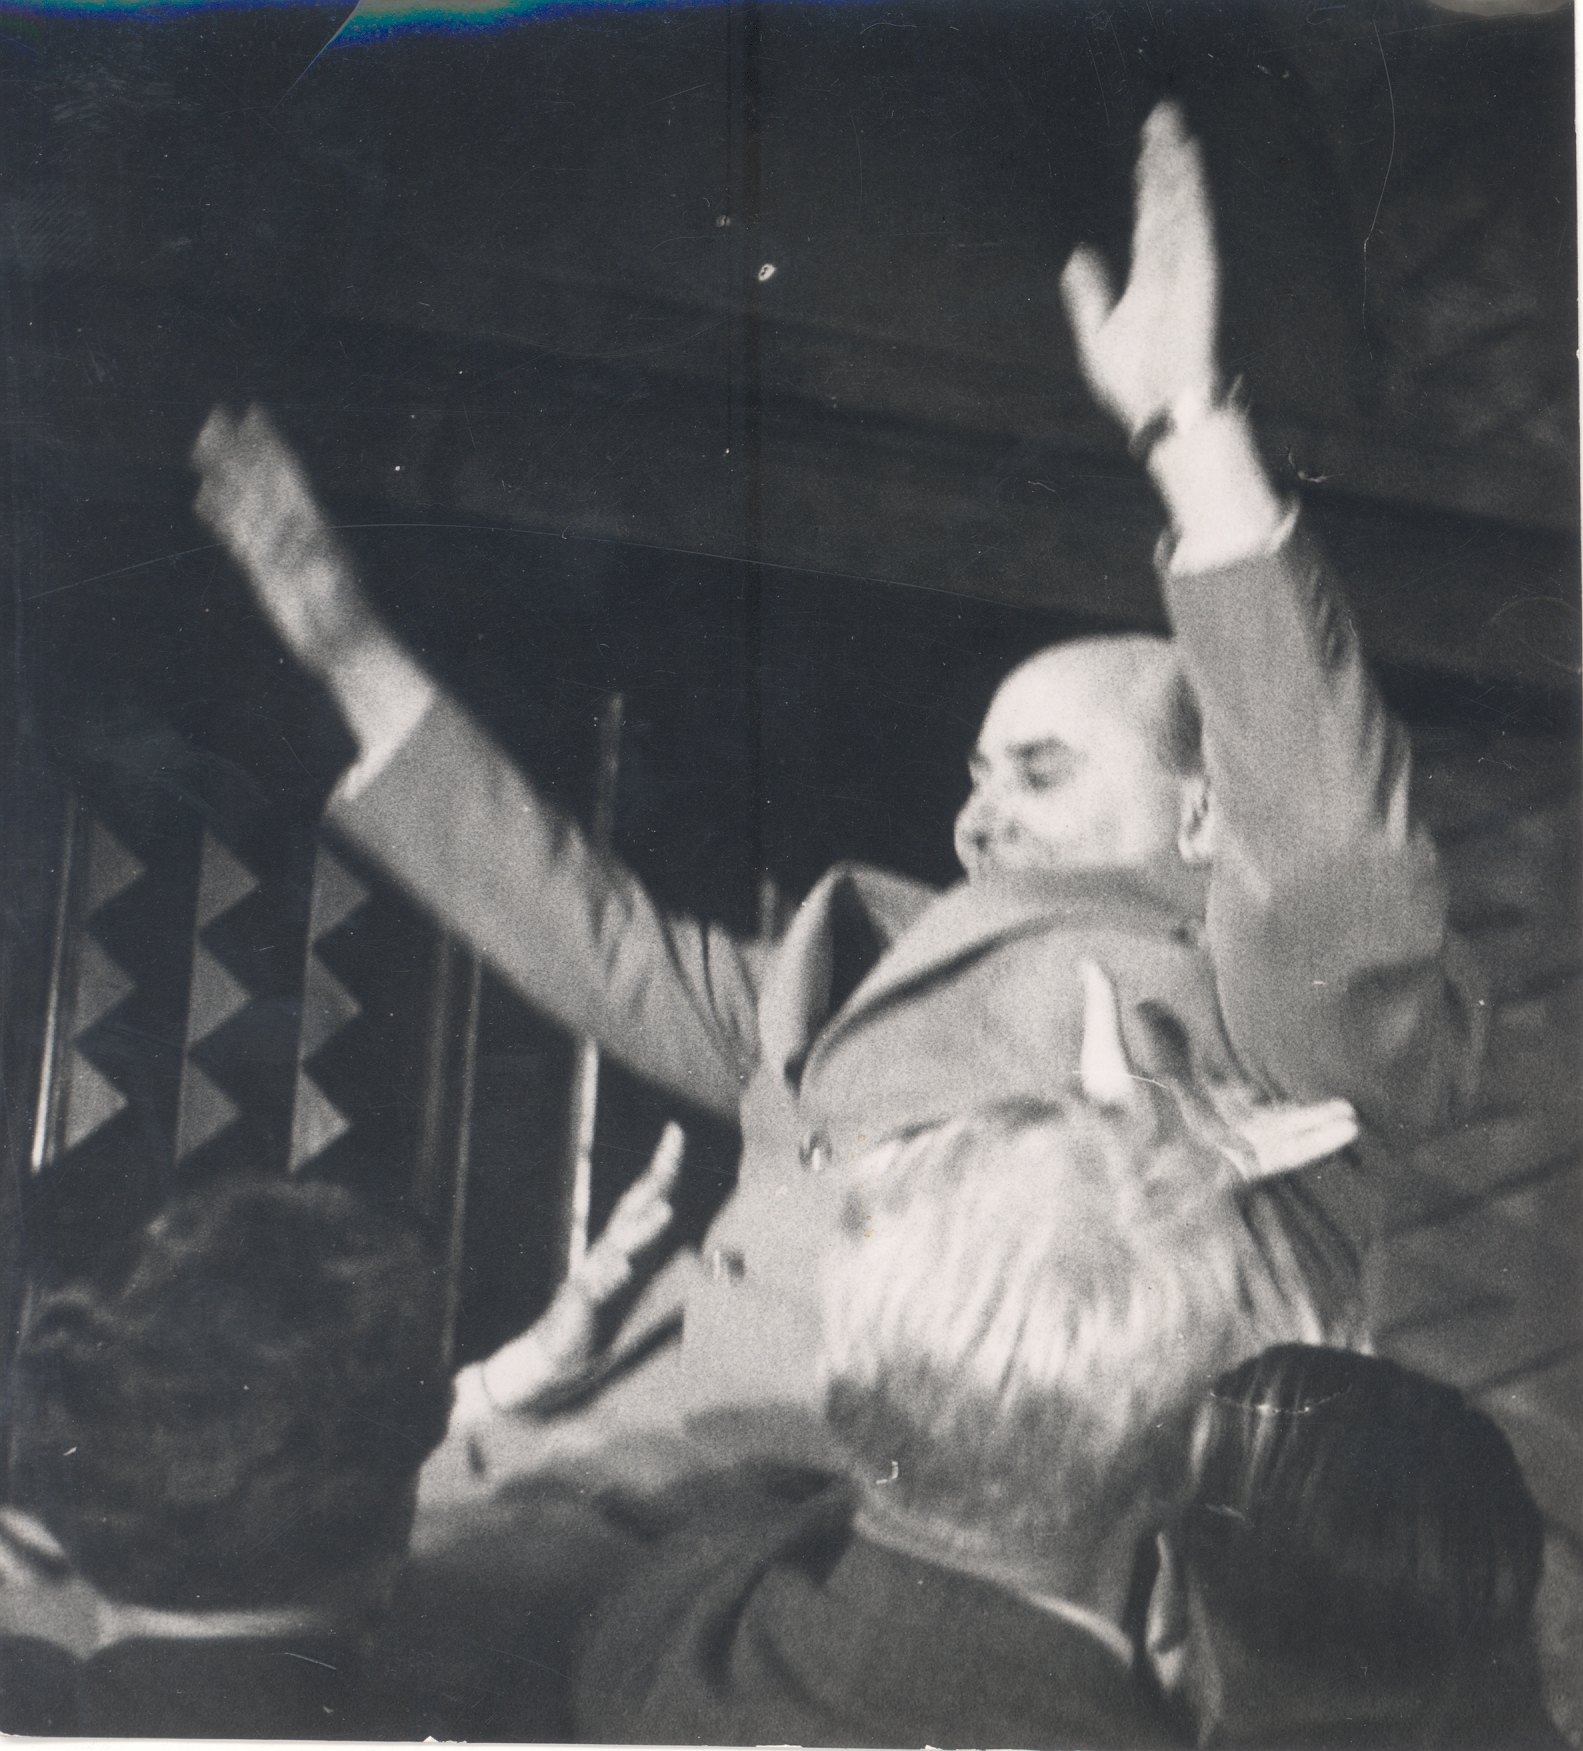 Election of J. Vares-Barbarus as Chairman of the Presidency of the Supreme Council of the USSR in 1940